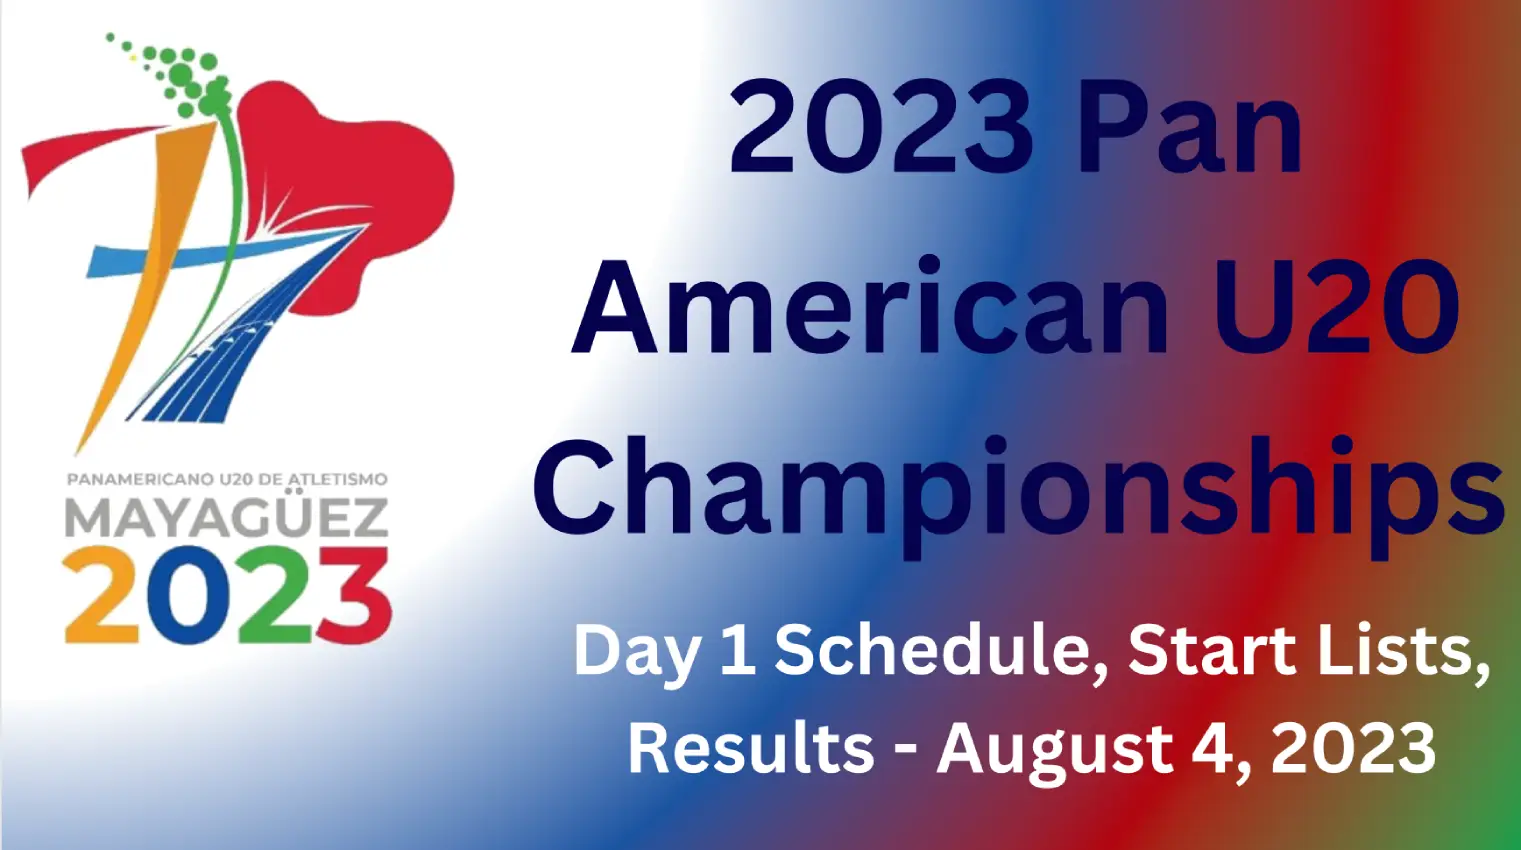 How to watch Day 1: 2023 Pan American U20 Championships, live results, start lists, schedule